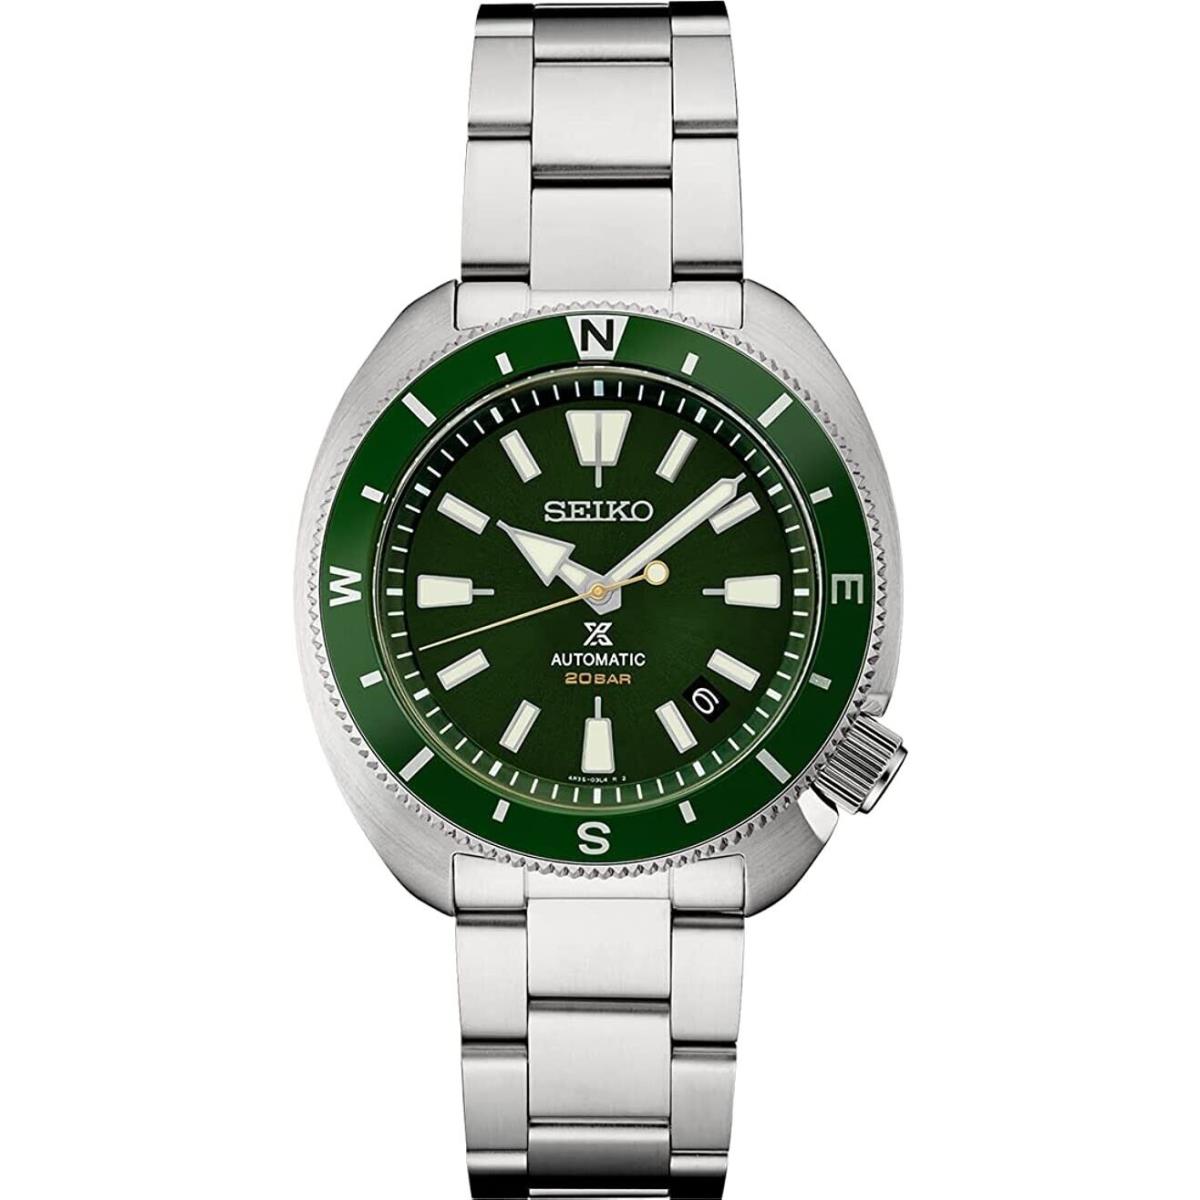 Seiko Prospex Automatic Green Dial Stainless Steel Men s Watch SRPH15 - Green Dial